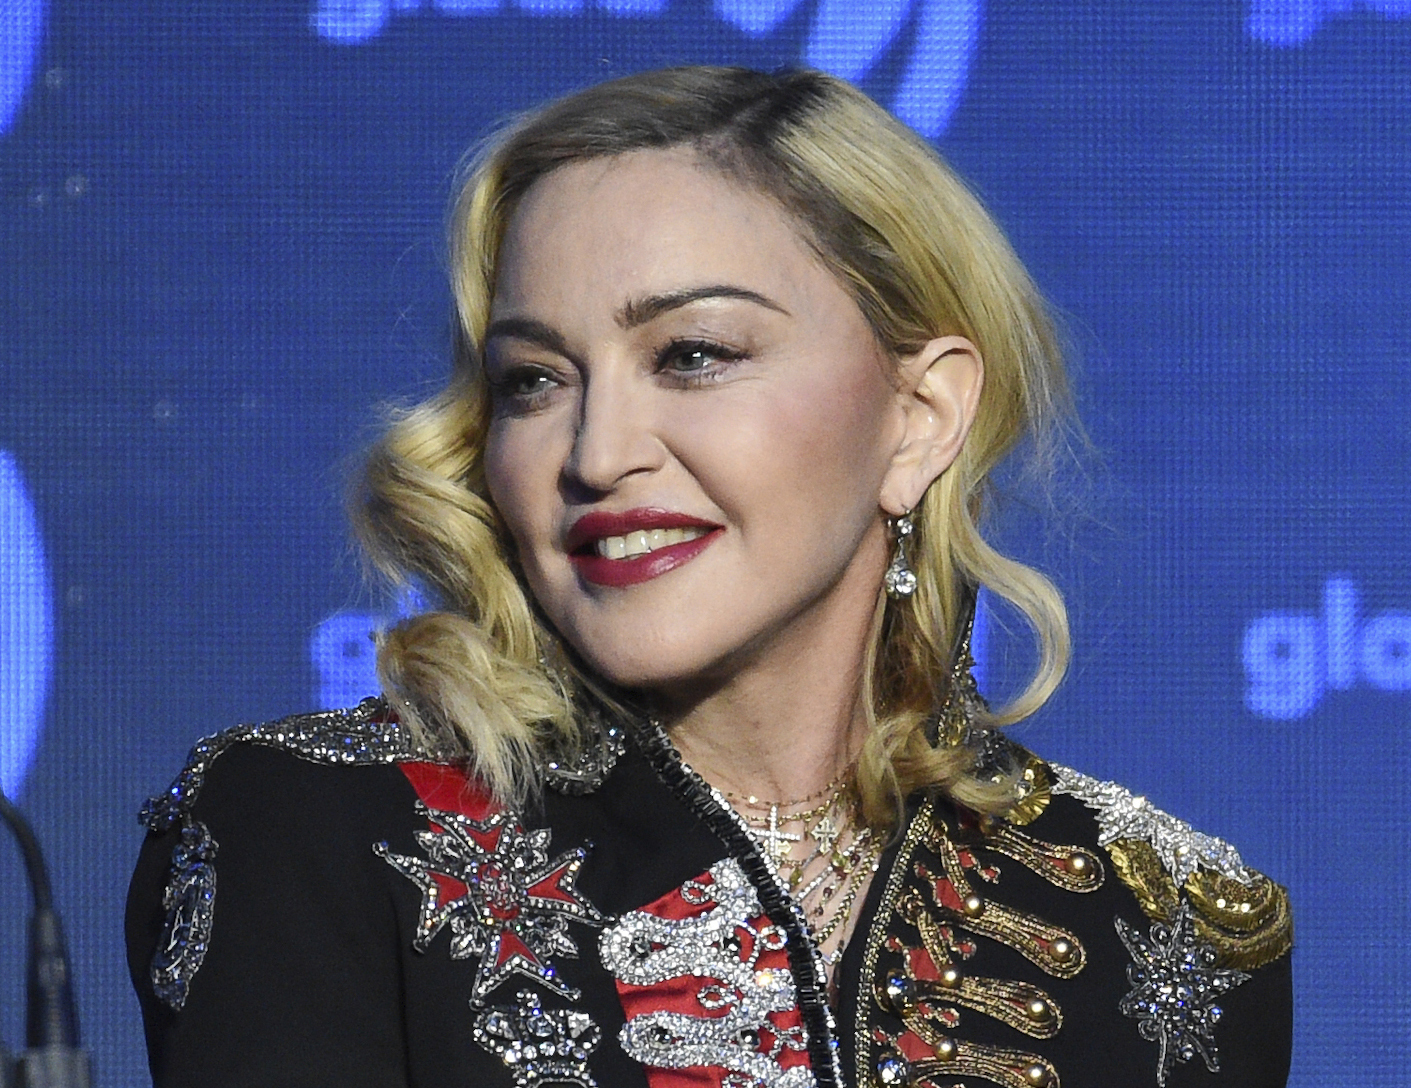 madonna-partied-with-alberto-guerra-and-zuria-vega-in-mexico-city